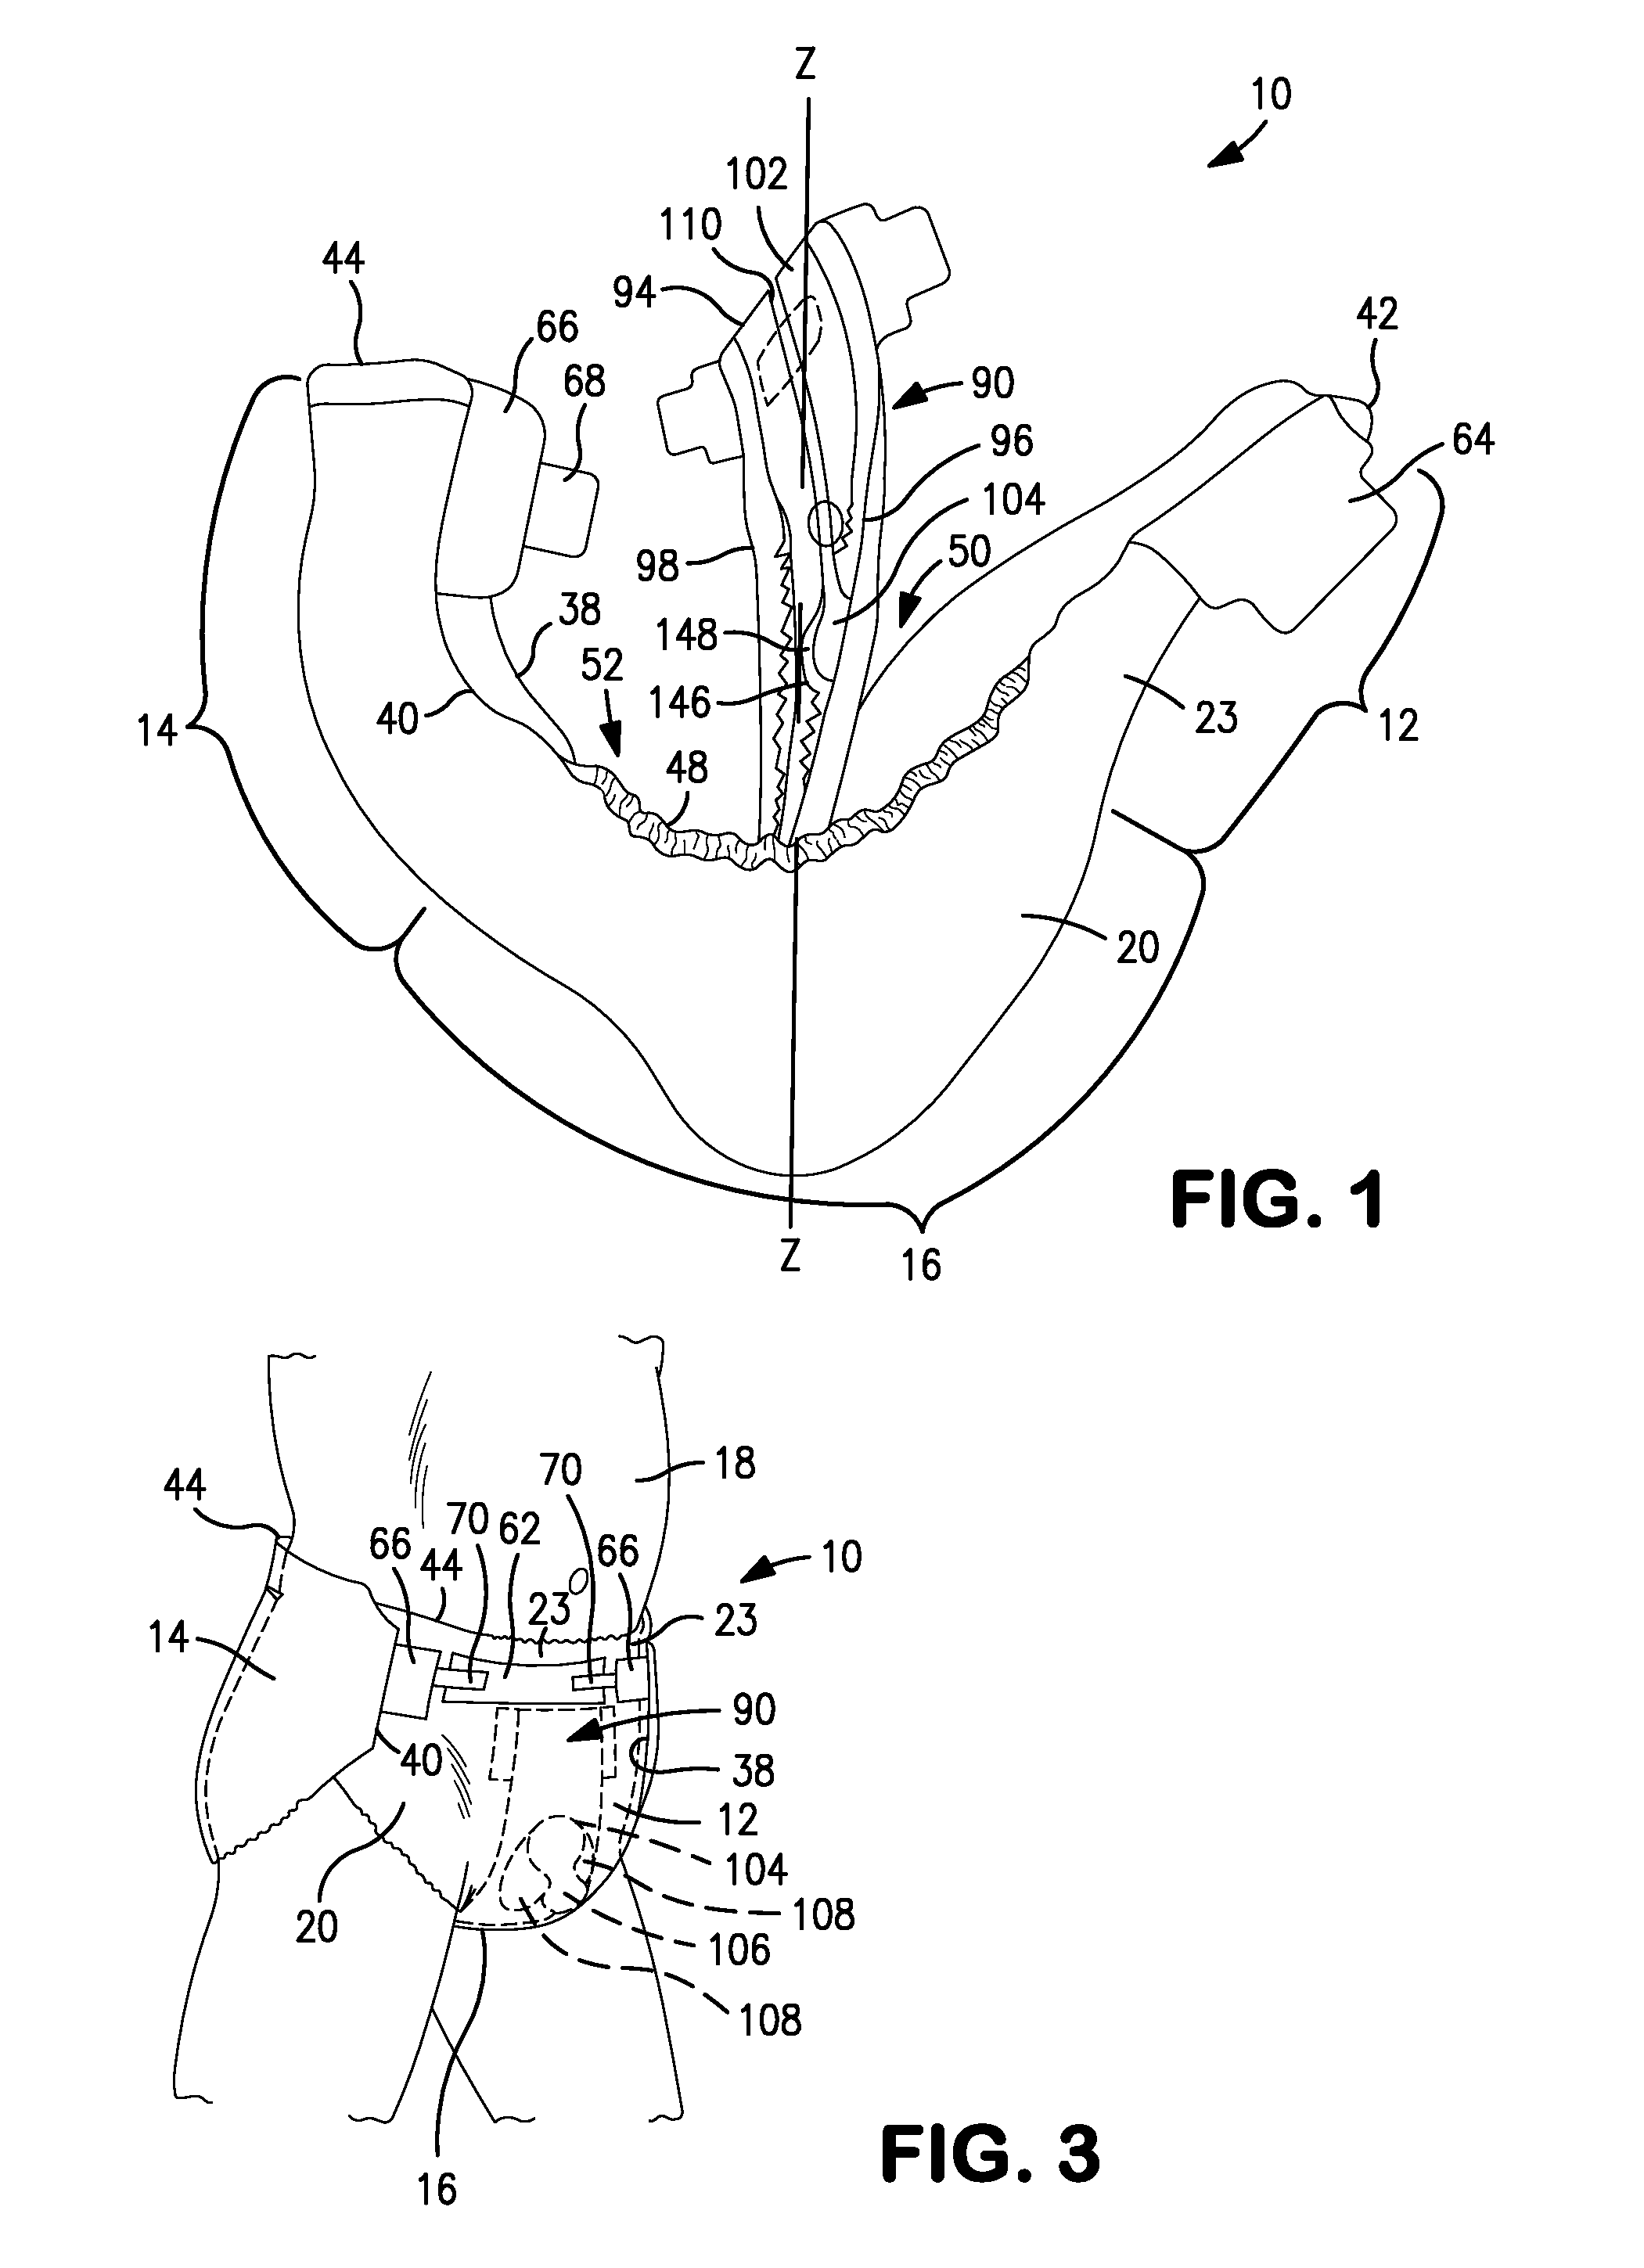 Absorbent article and a method of forming and using